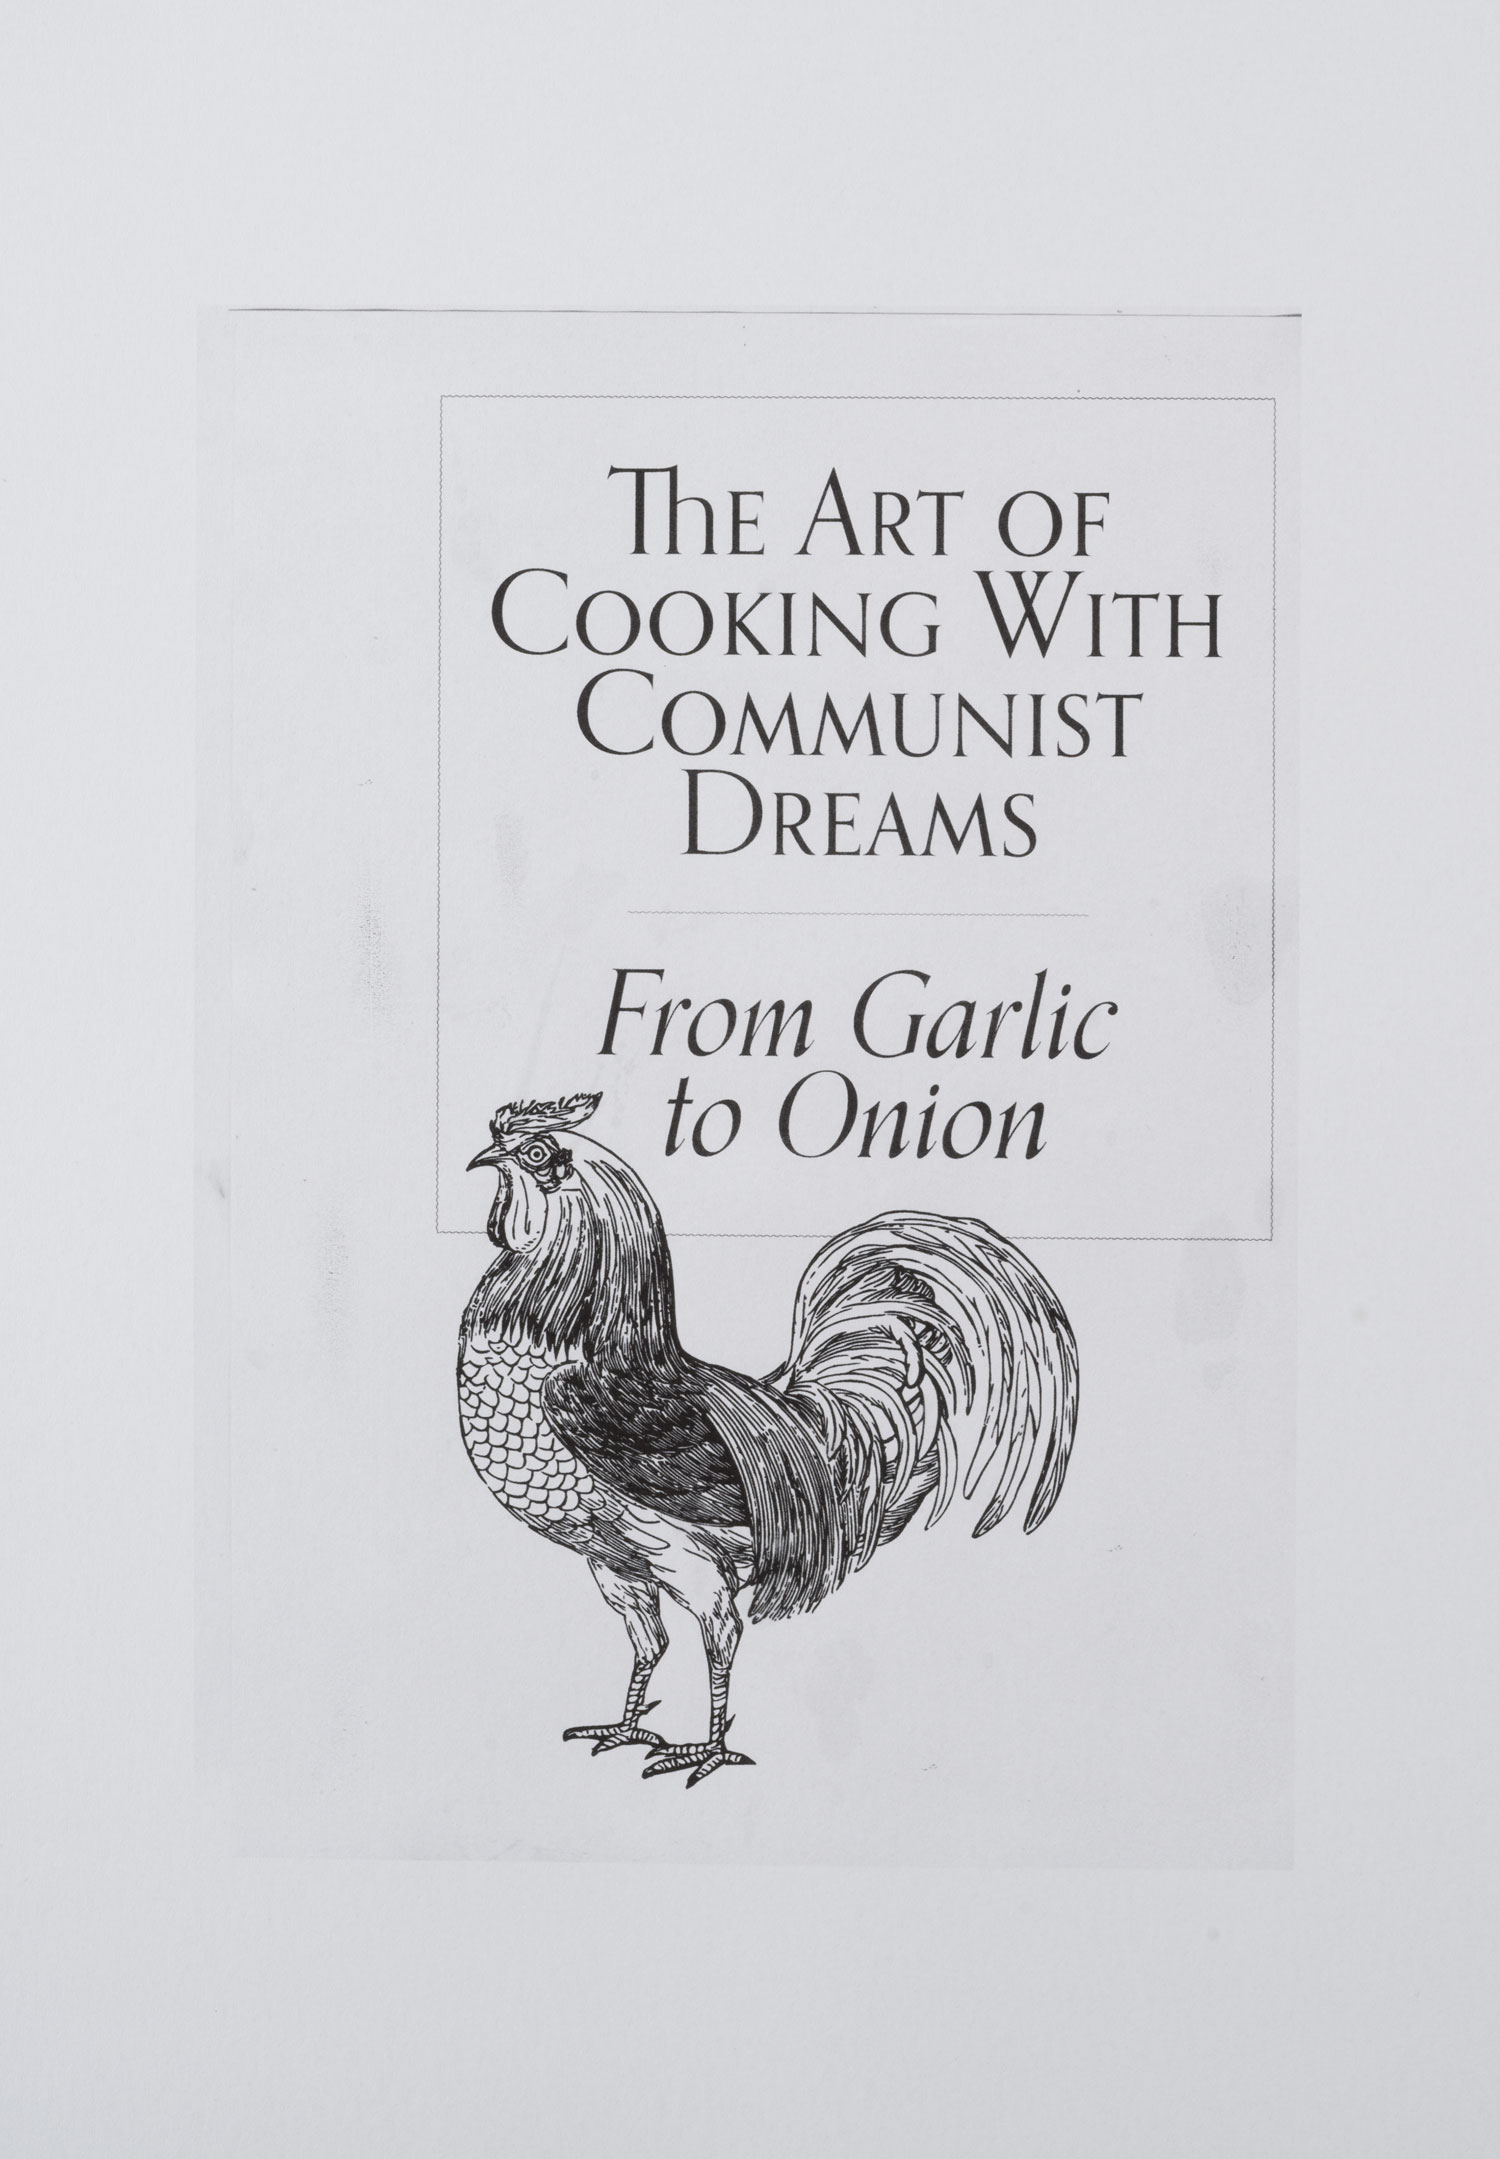 The art of cooking with communist dreams